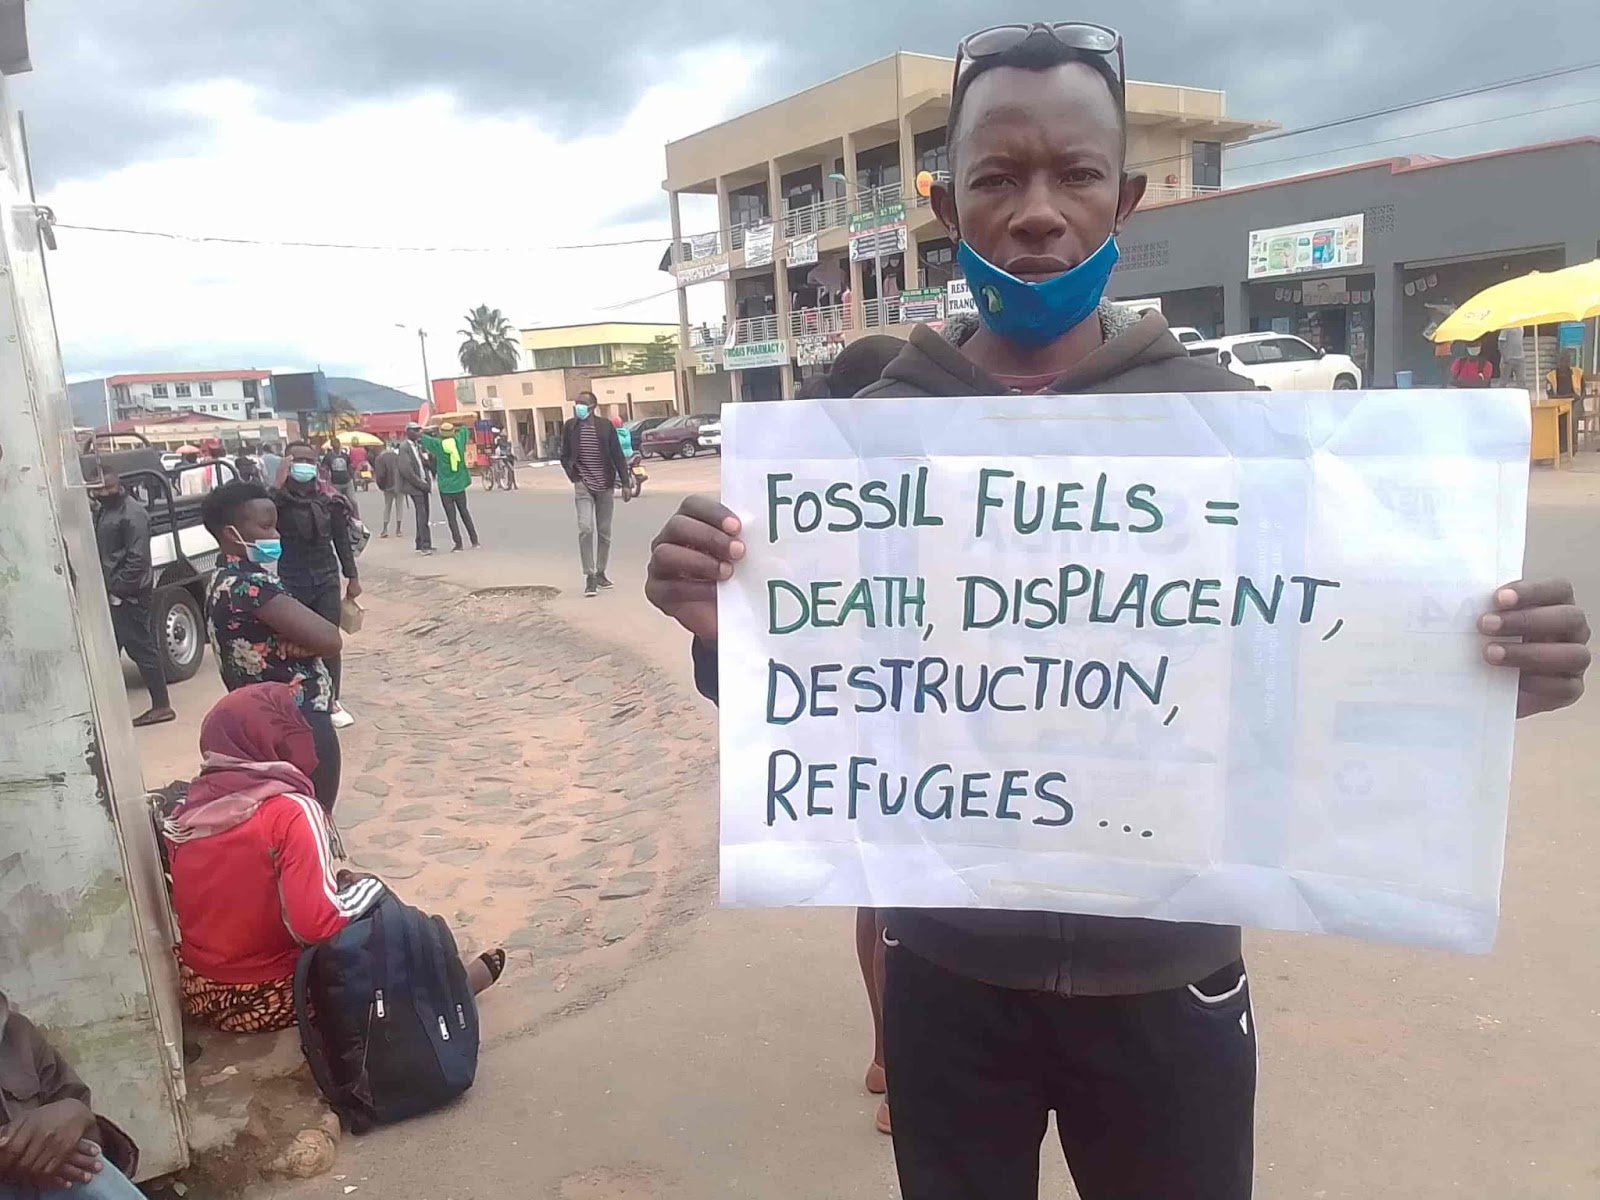 A rebel in a Rwandan city street holds a sign against fossil fuels.